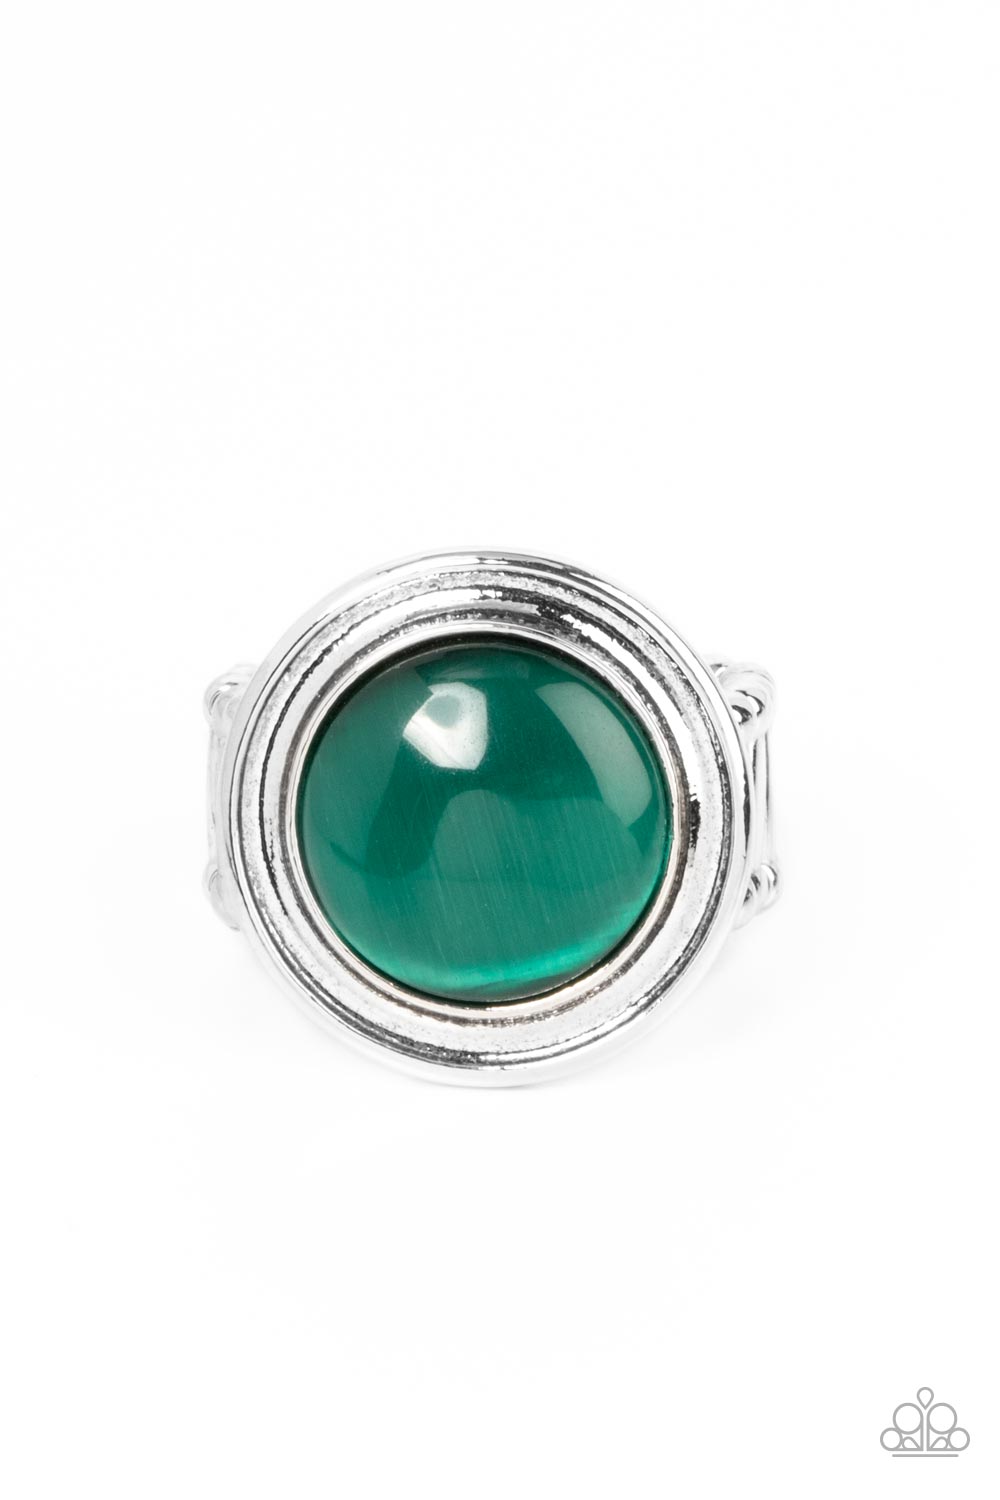 A green cat's eye stone is encircled in rippling silver frames, pooling into an ethereal pop of color atop the finger. Features a stretchy band for a flexible fit.